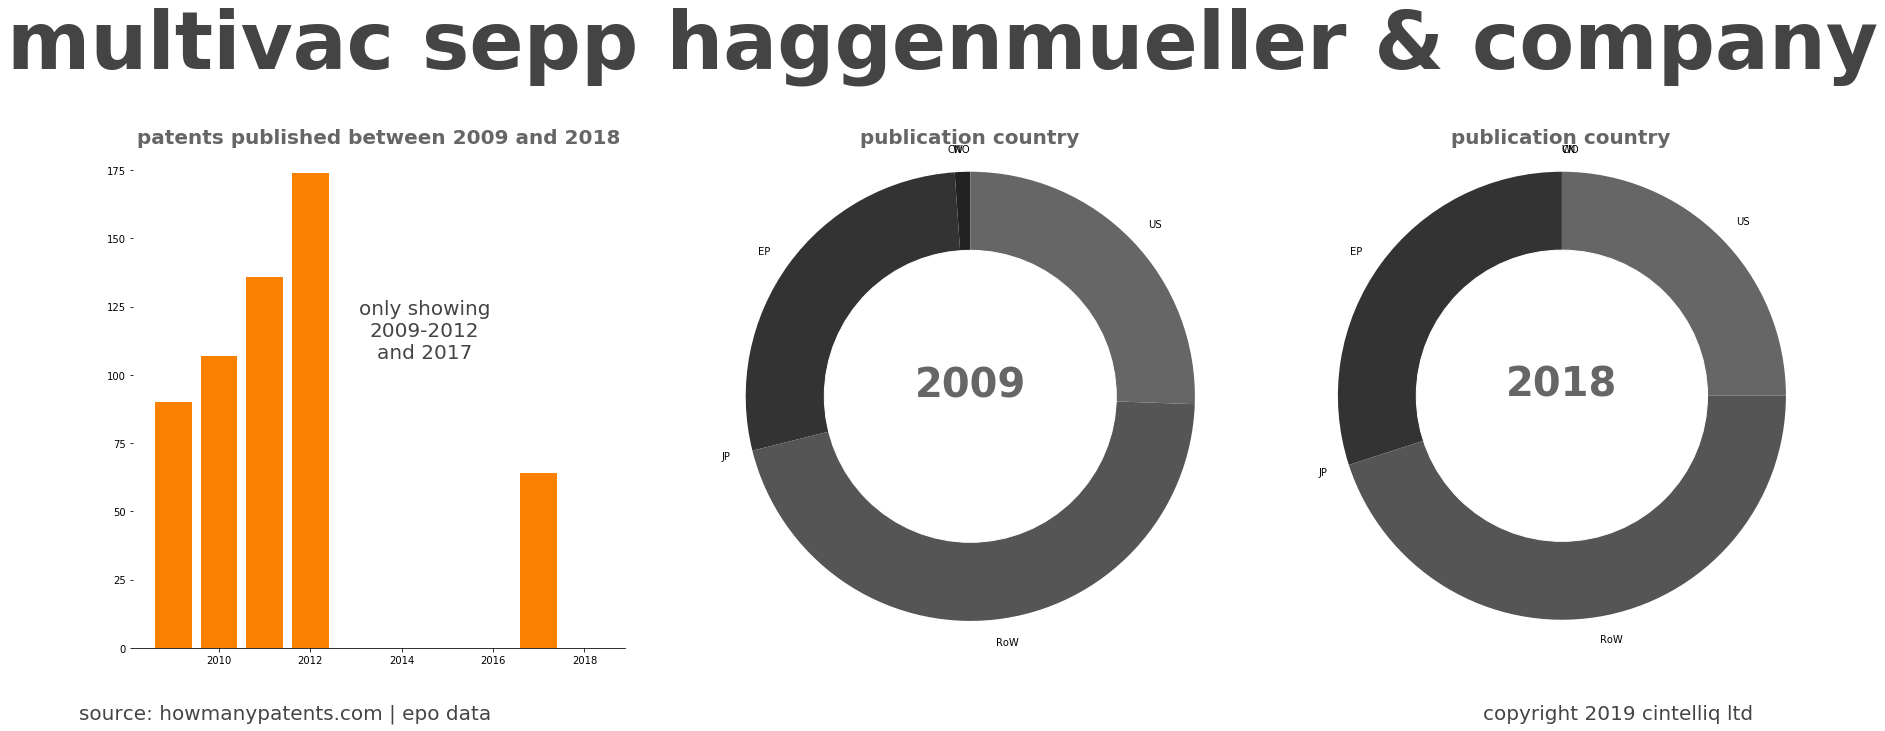 summary of patents for Multivac Sepp Haggenmueller & Company